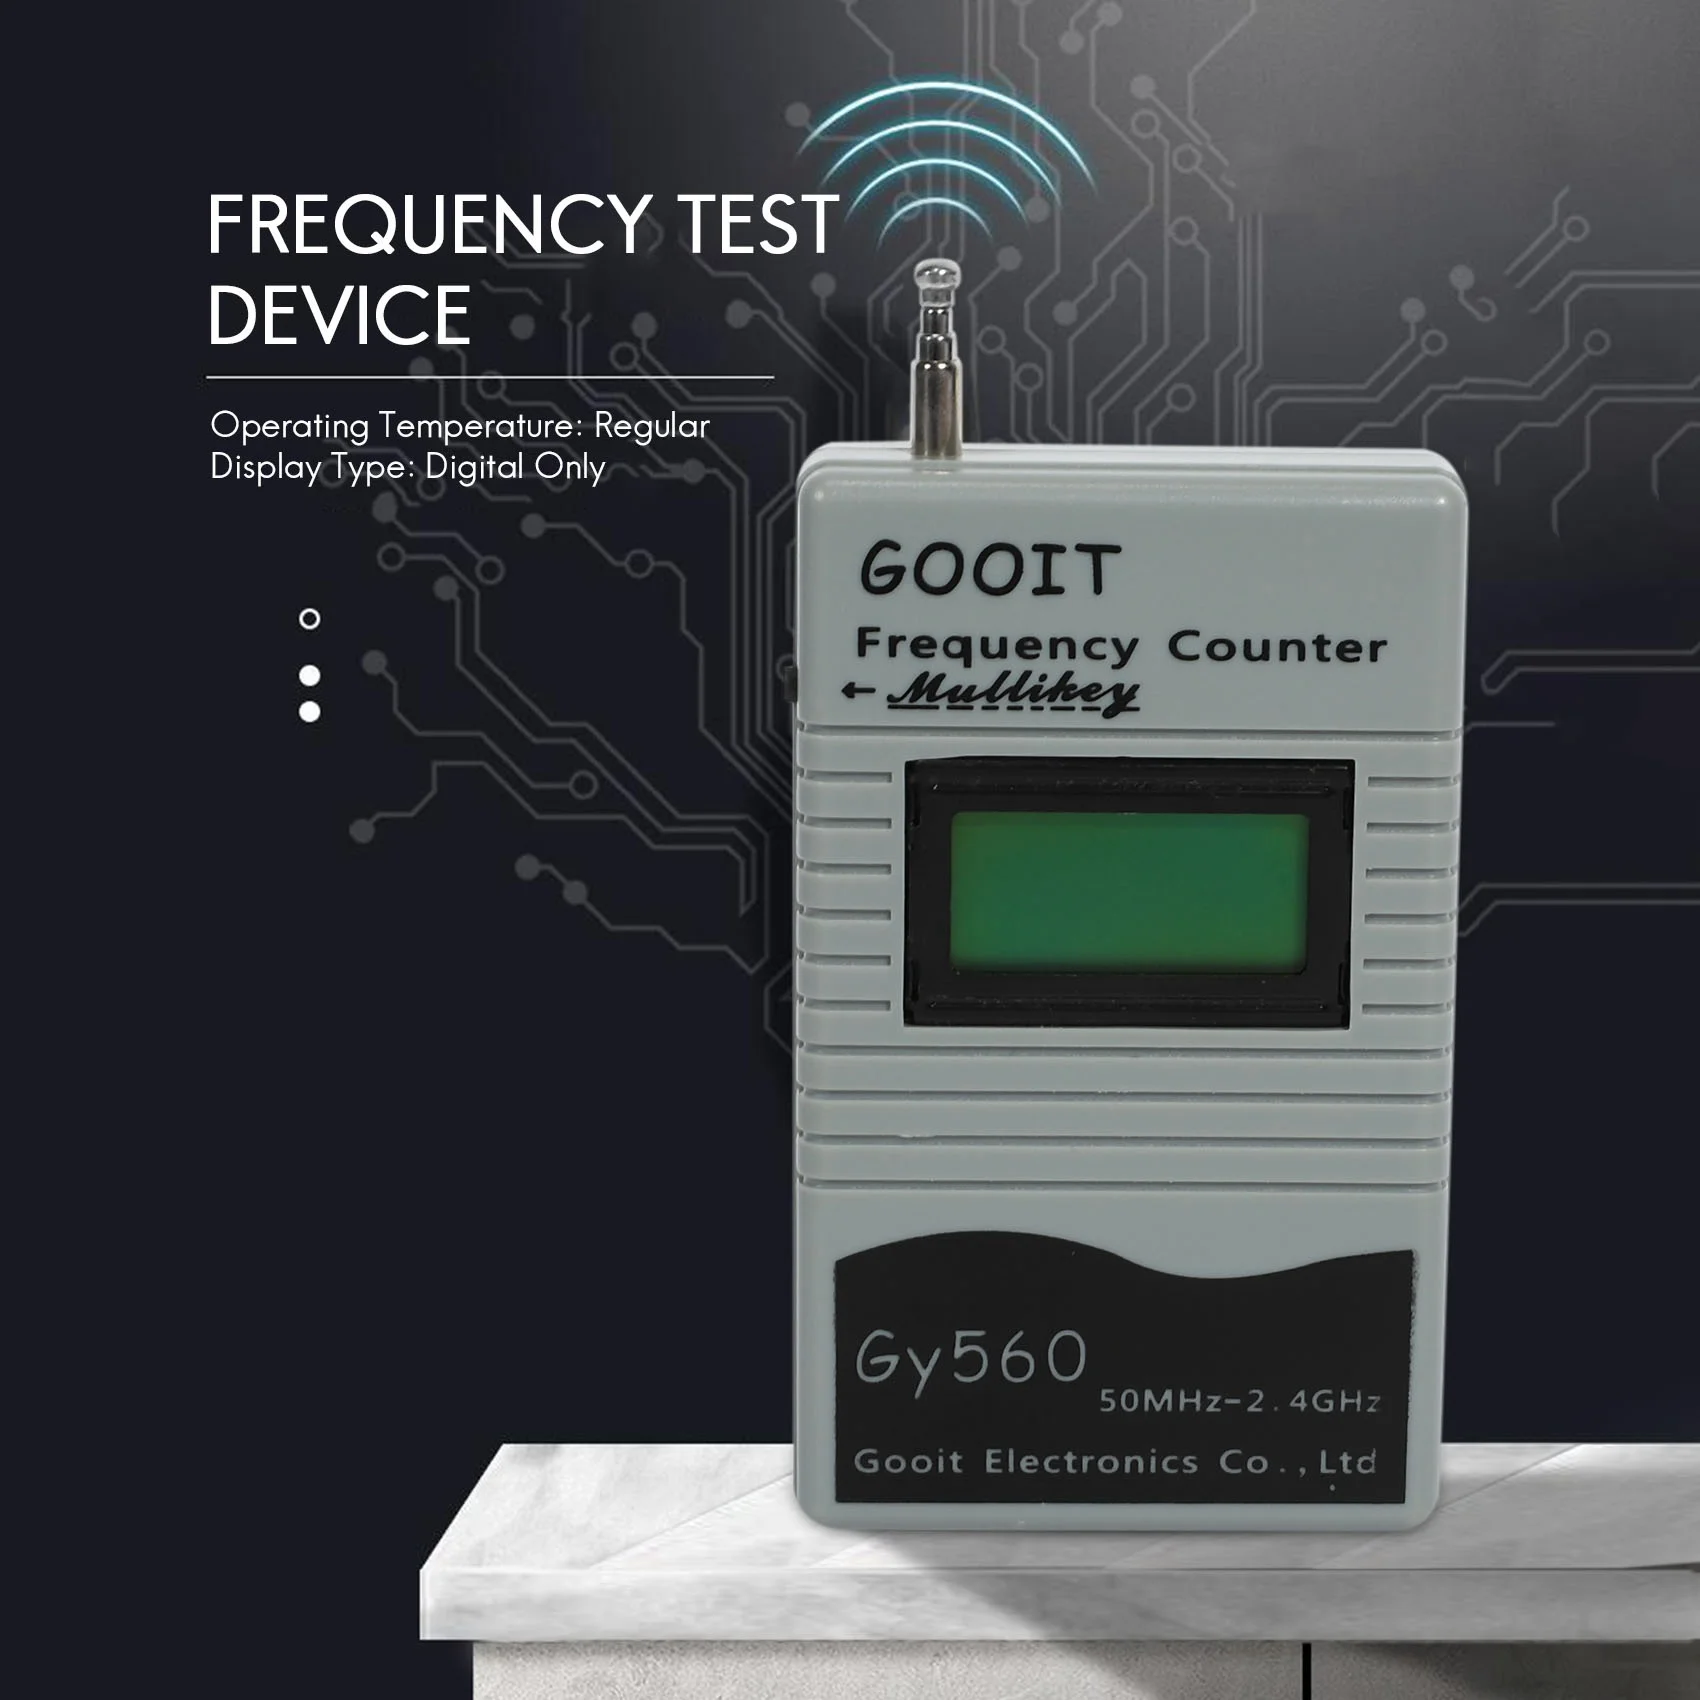 

Frequency Test Device for Two Way Radio Transceiver GSM 50 MHz-2.4 GHz GY560 Frequency Counter Meter